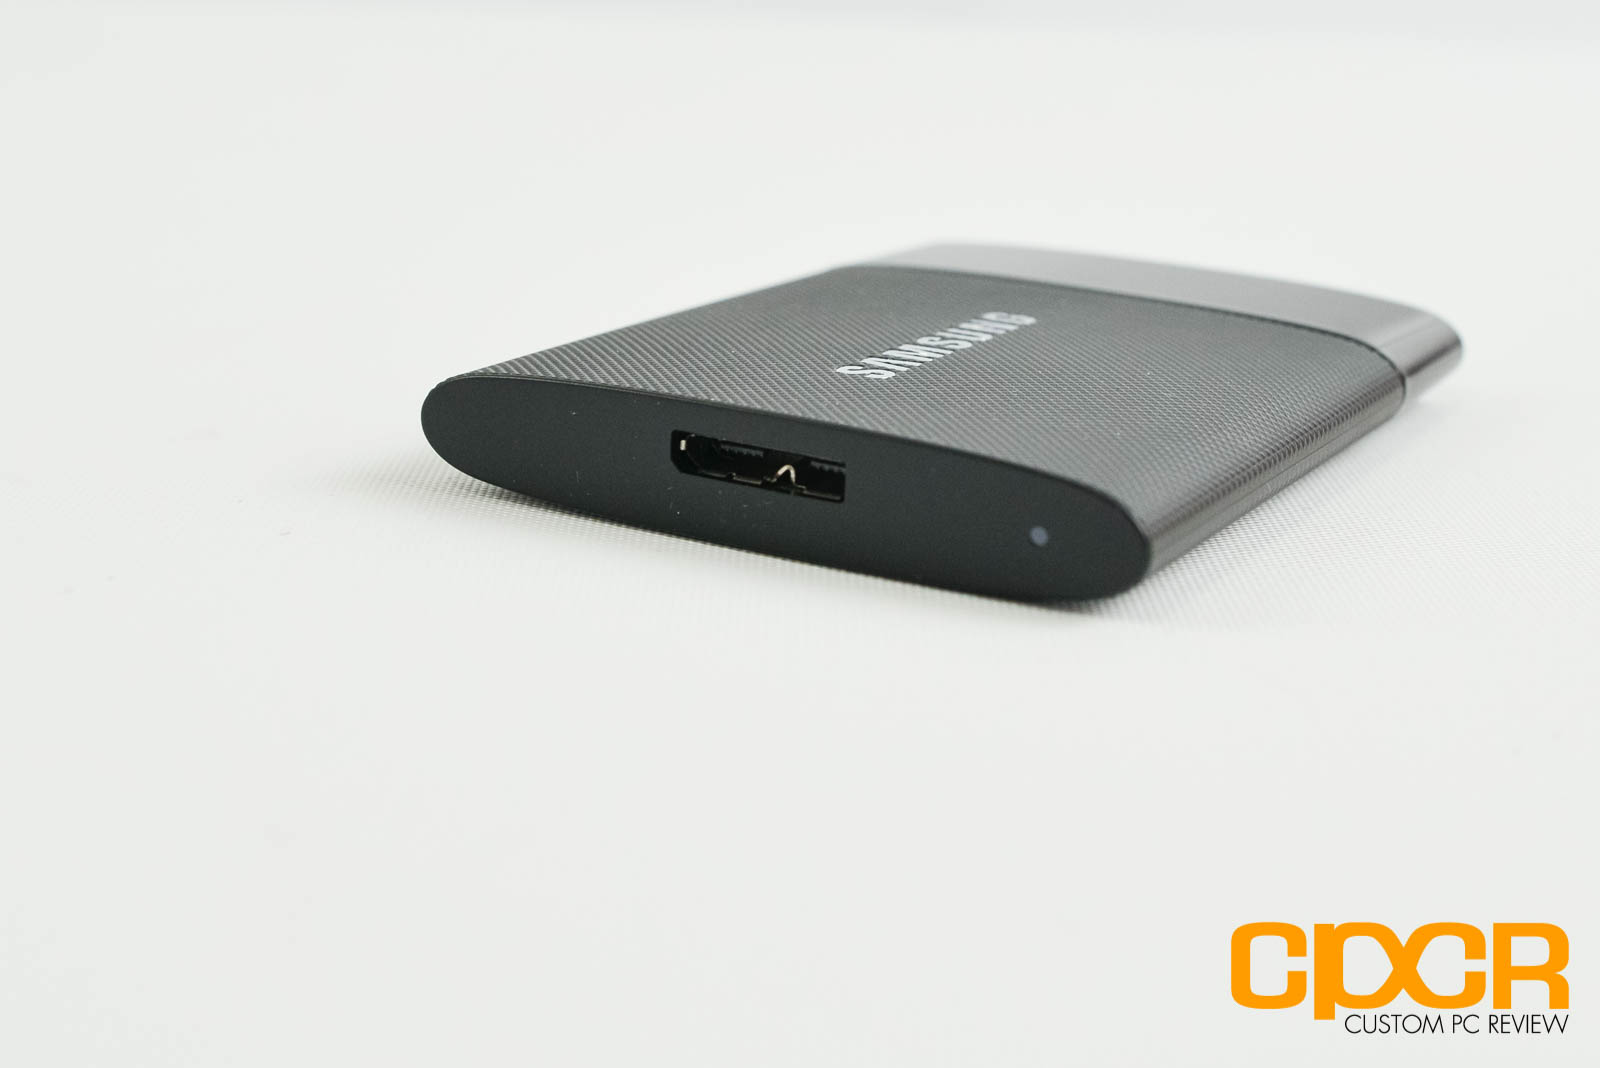 Smitsom sygdom 鍔 Oprigtighed Review: Samsung Portable SSD T1 500GB | Custom PC Review